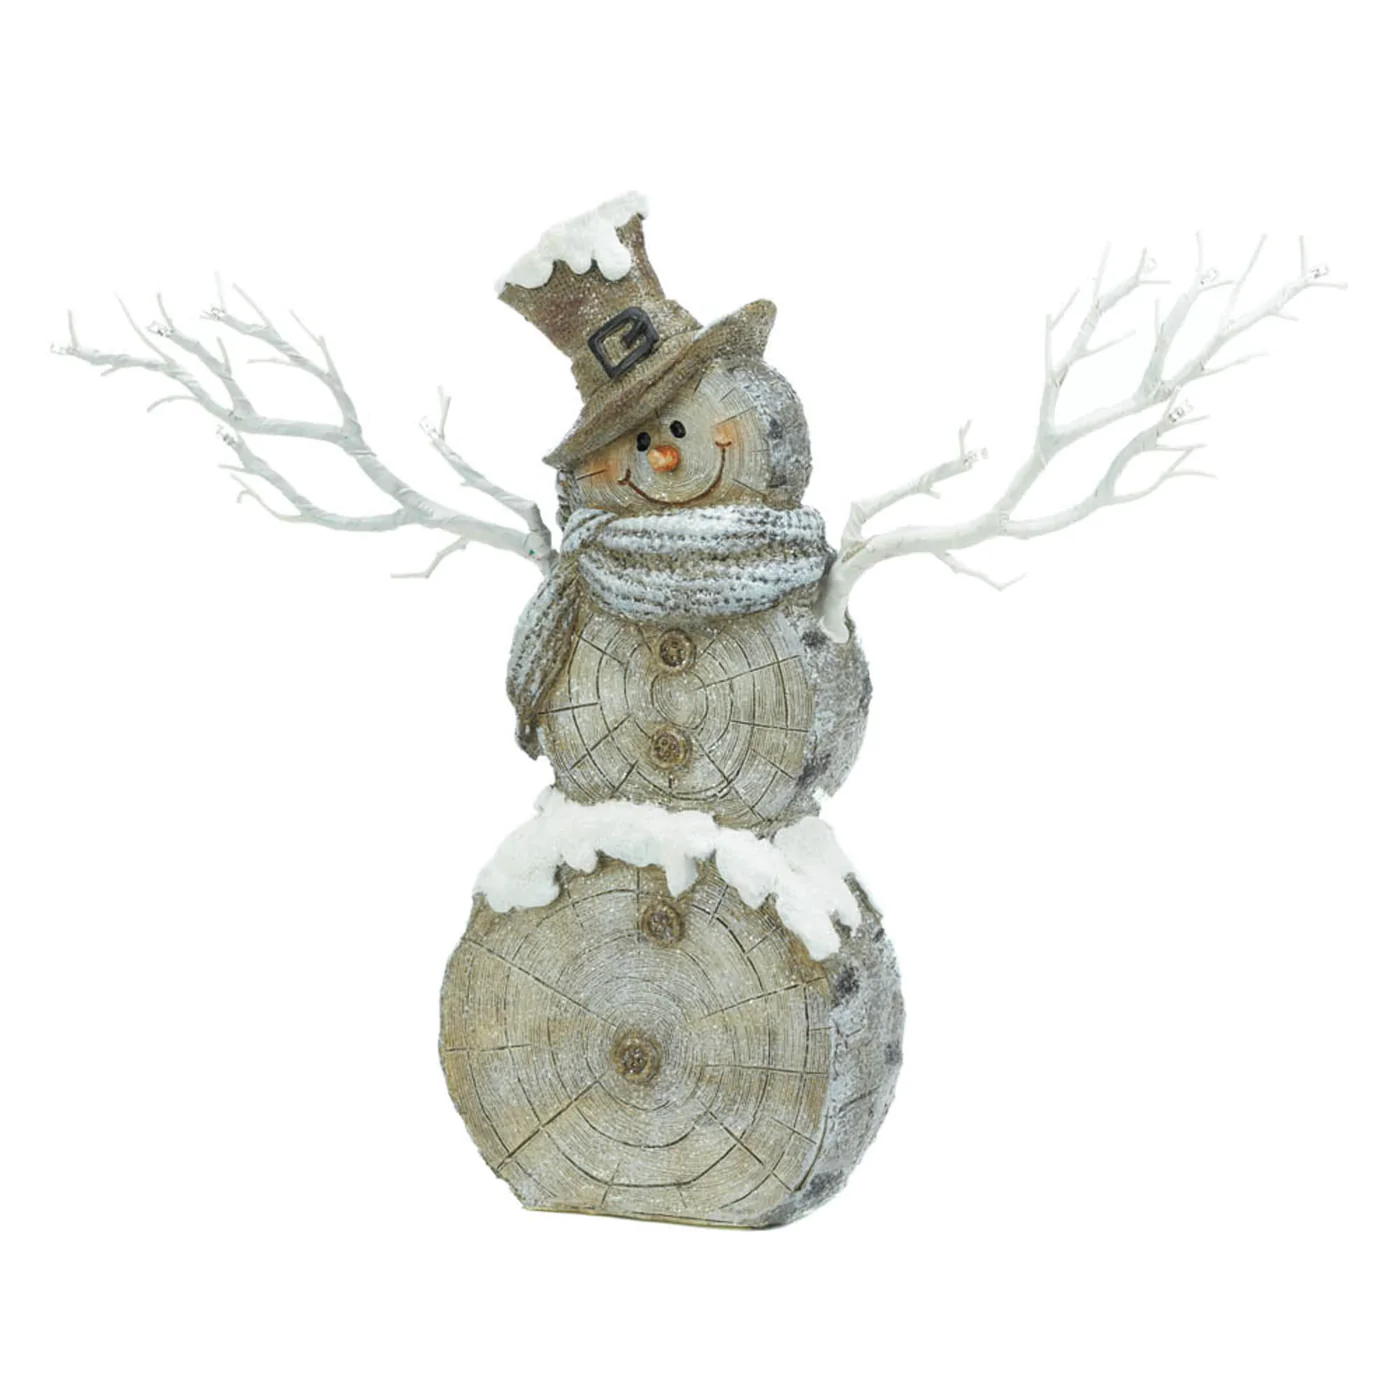 SNOWMAN STATUE WITH TWIG LIGHTS - $70.89